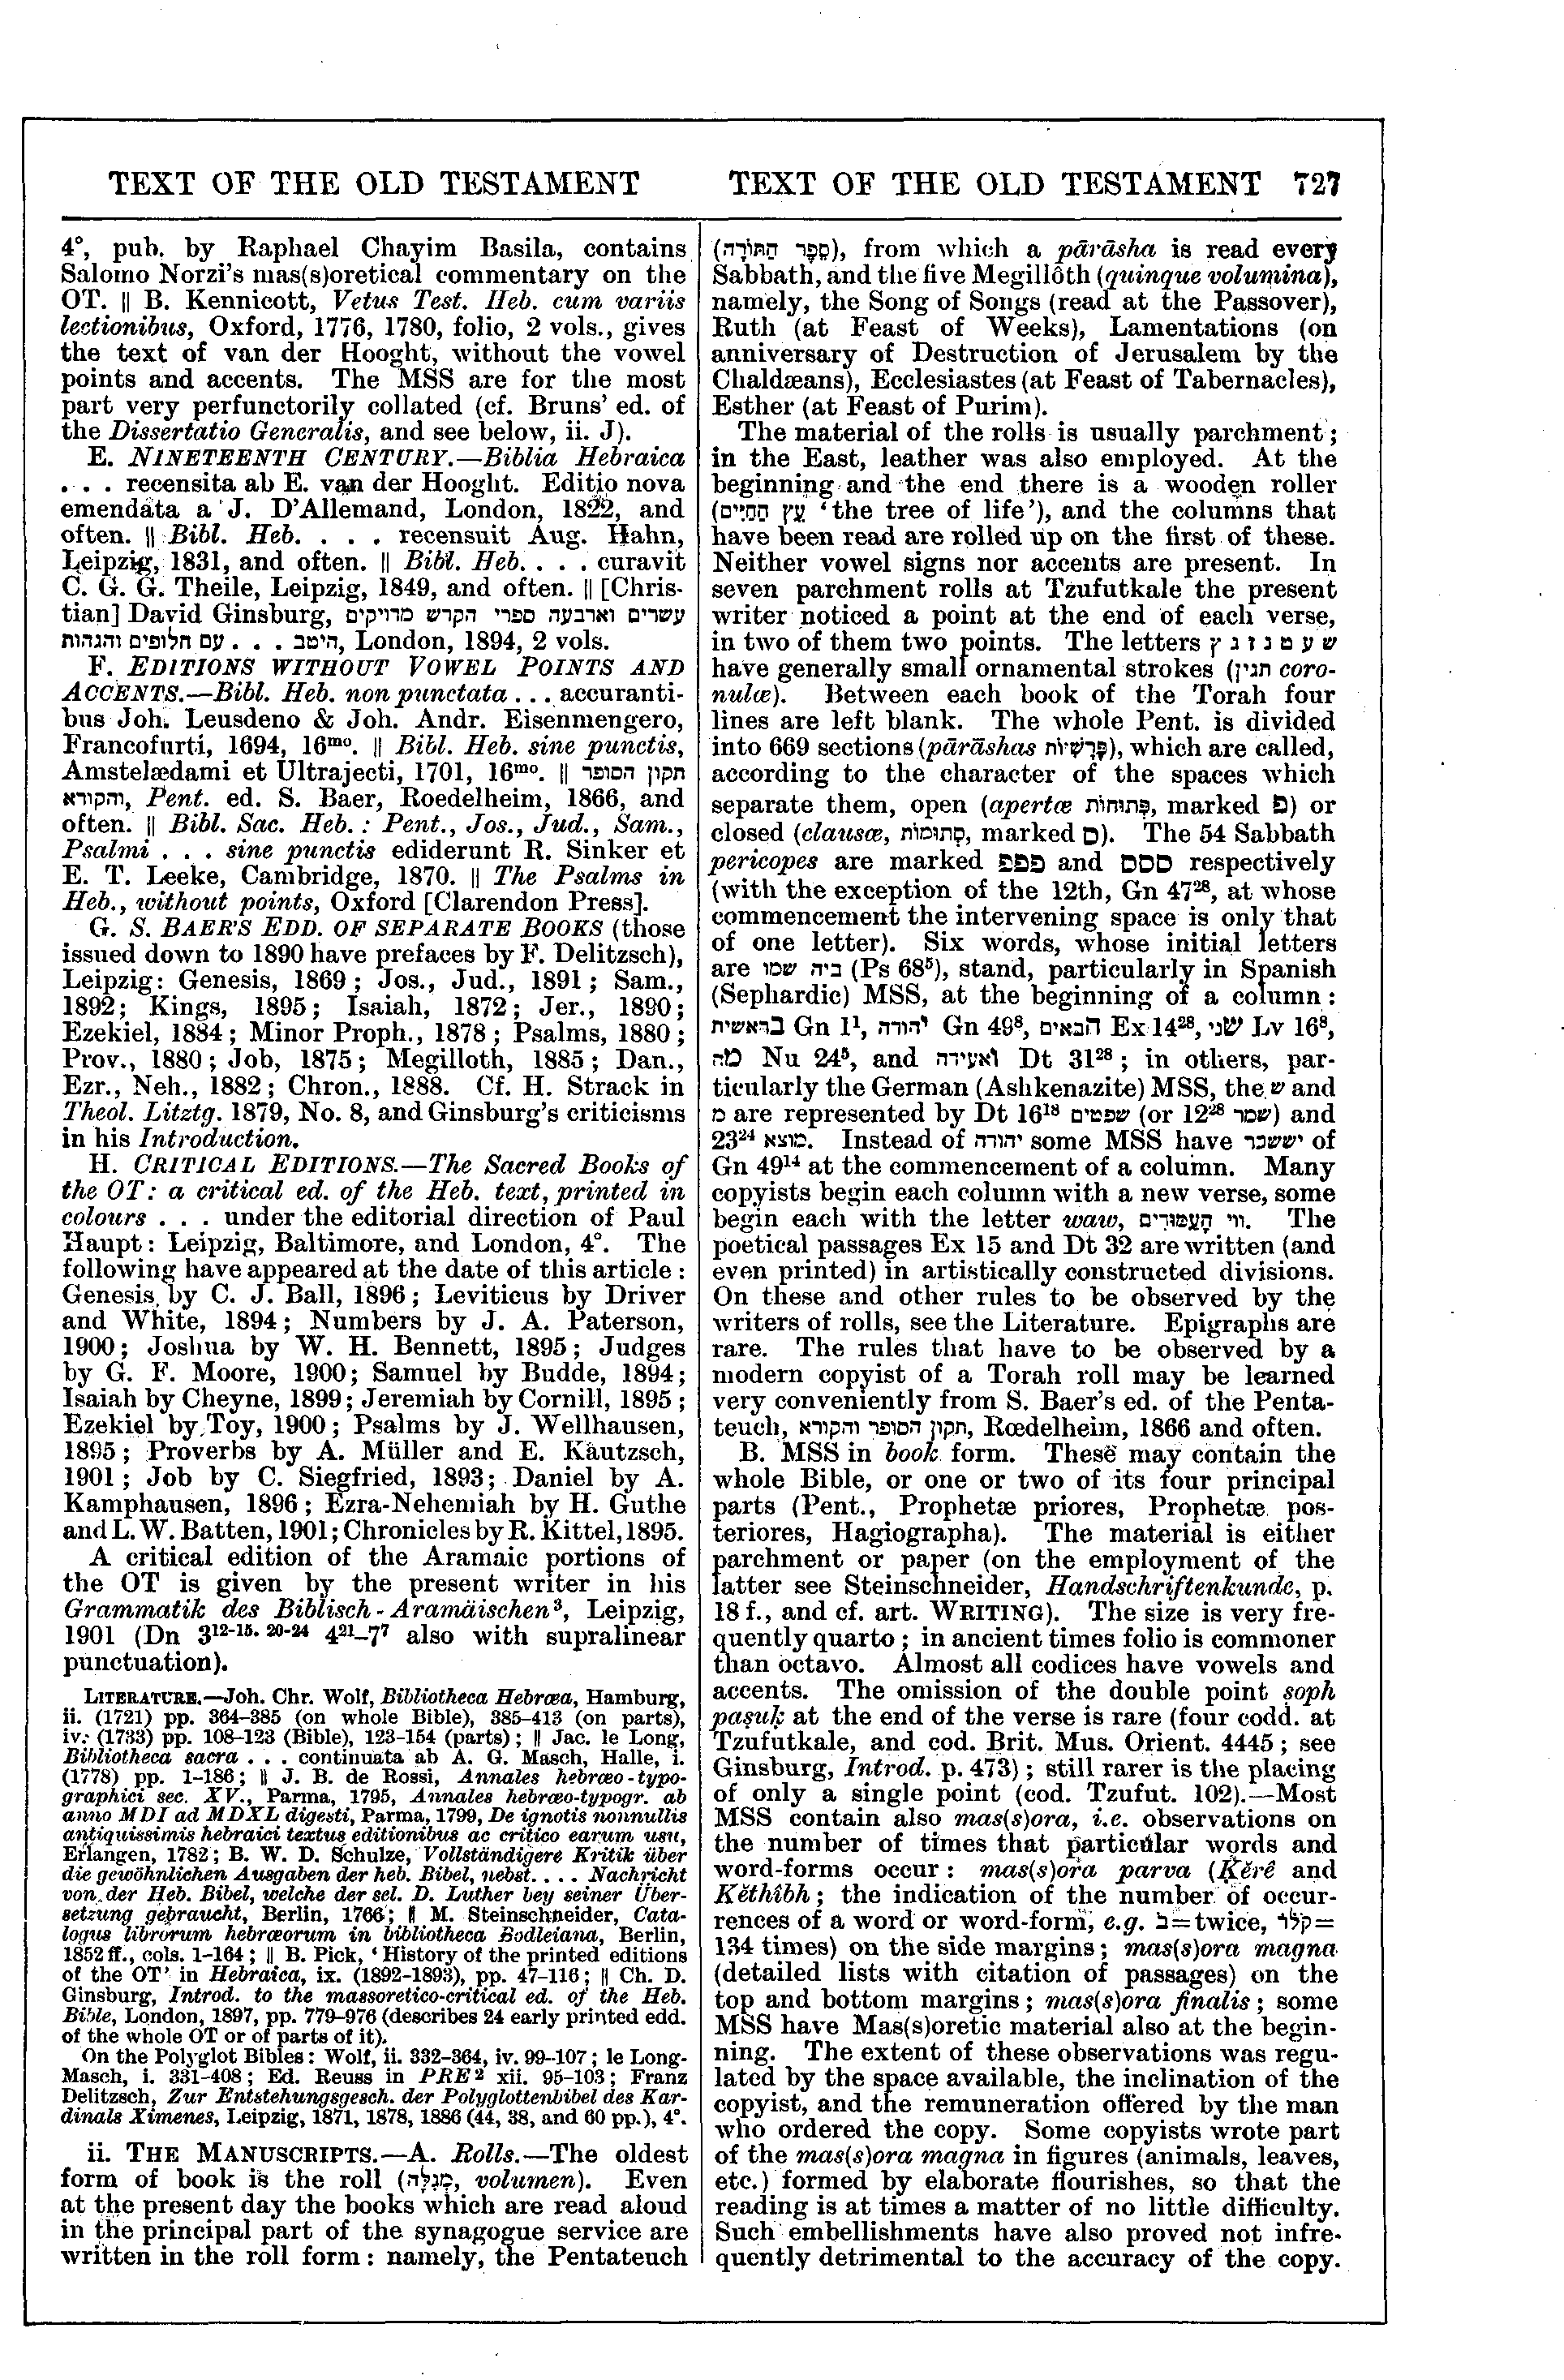 Image of page 727